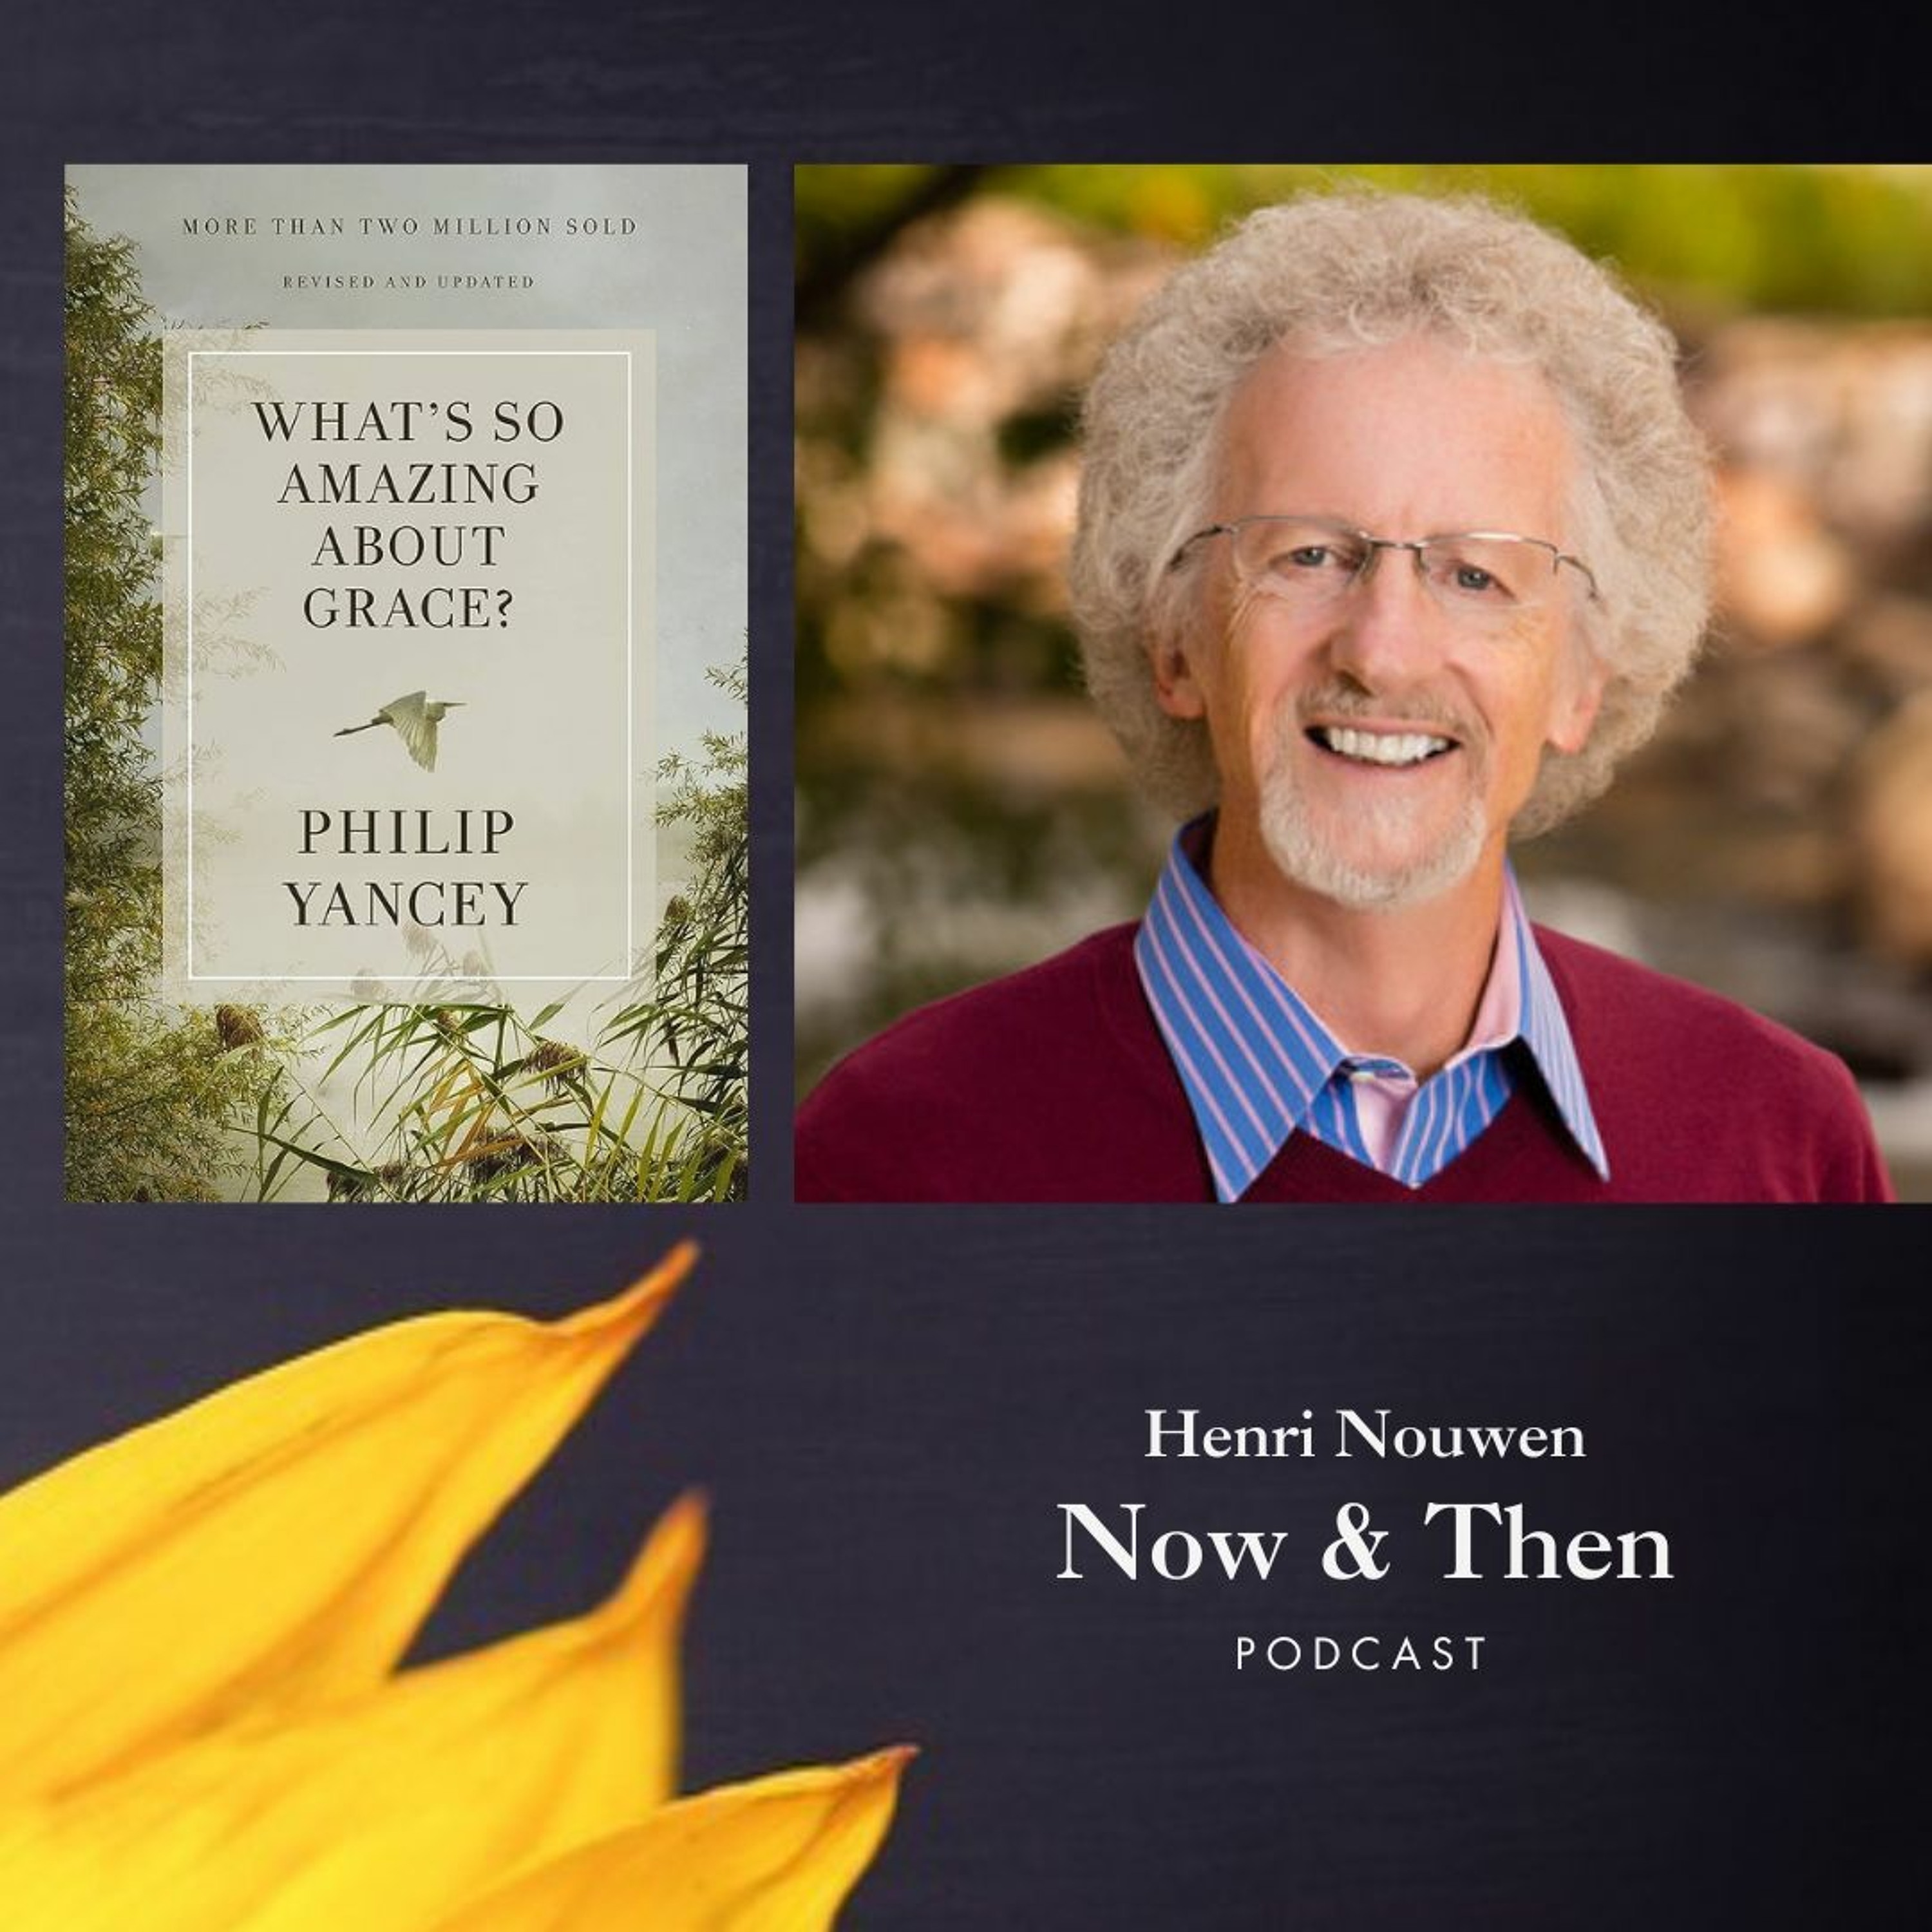 Henri Nouwen, Now & Then Podcast | Philip Yancey, "The Question of Suffering"